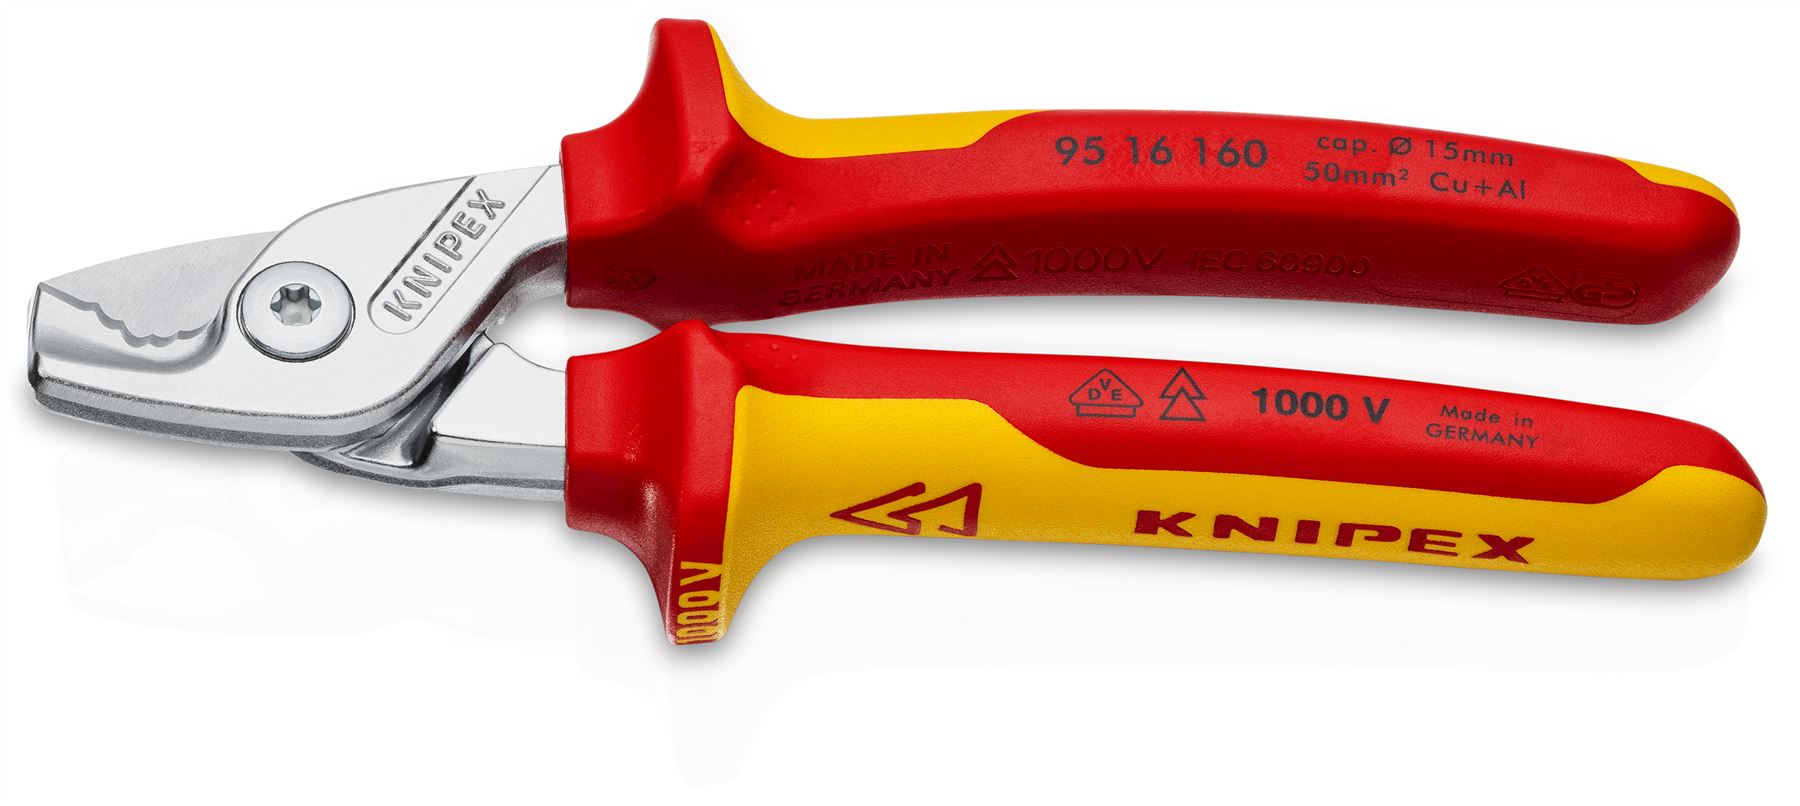 KNIPEX StepCut Cable Shears Cutting Pliers 15mm Capacity 160mm Chrome VDE Insulated Multi Component Grips 95 16 160 SB